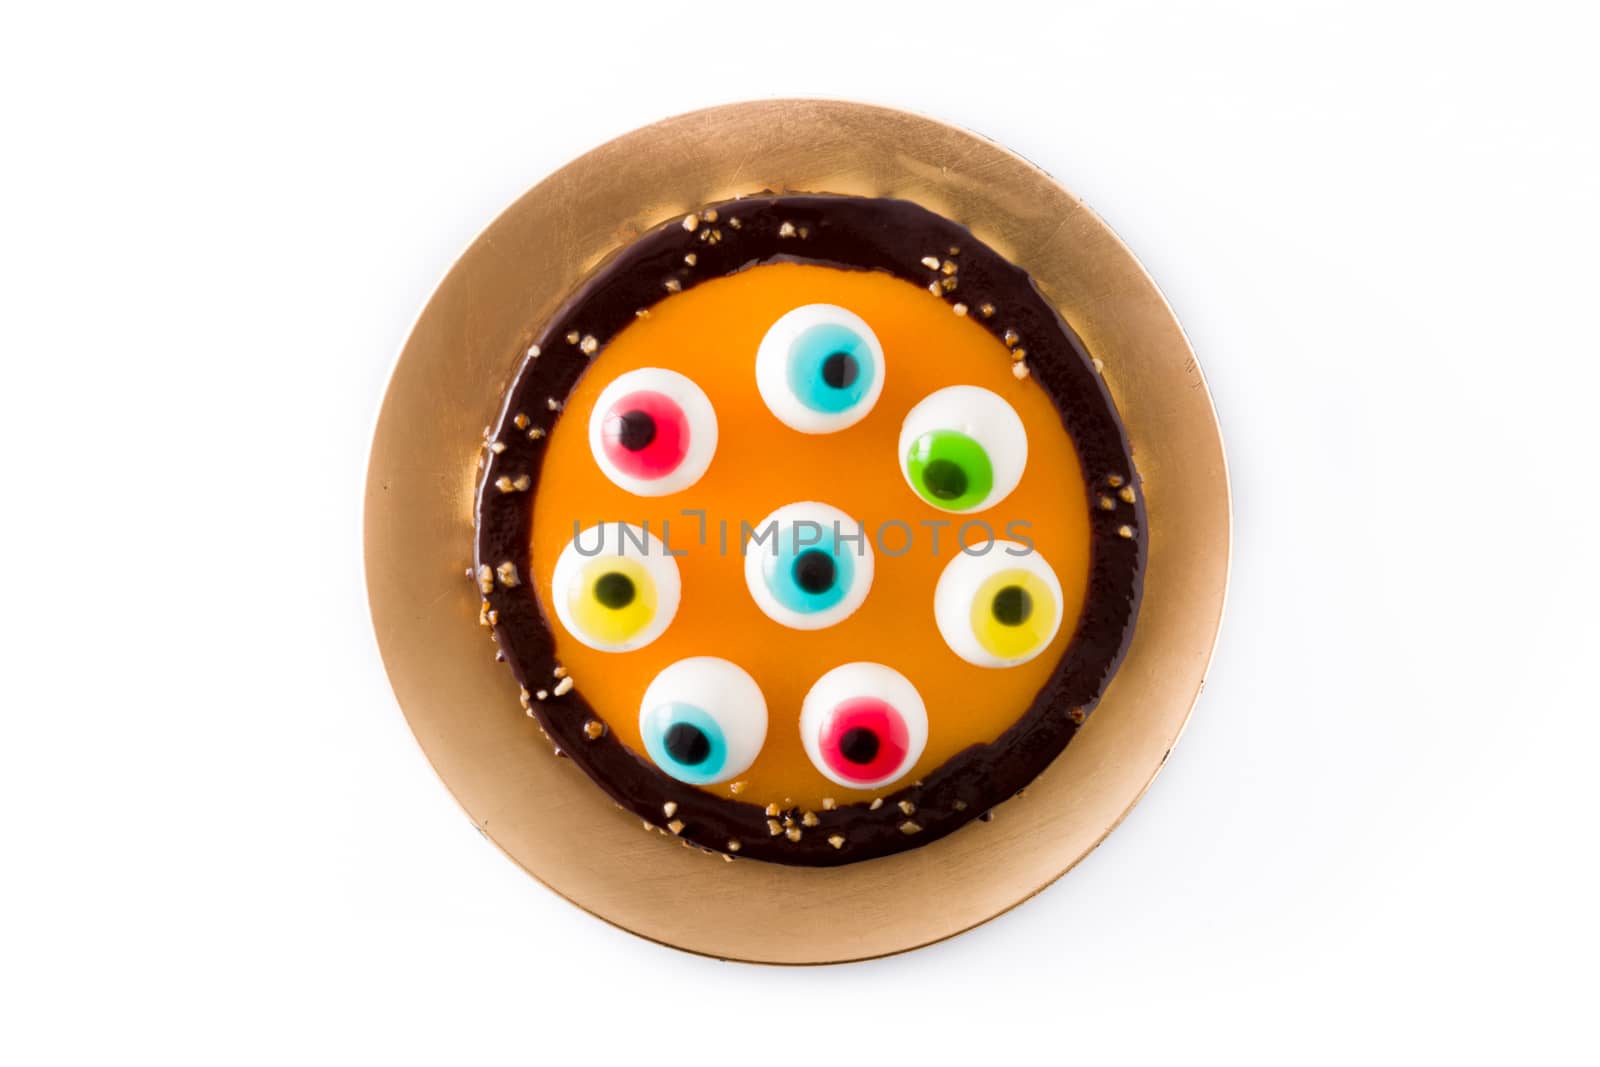 Halloween cake with candy eyes decoration isolated on white background. by chandlervid85